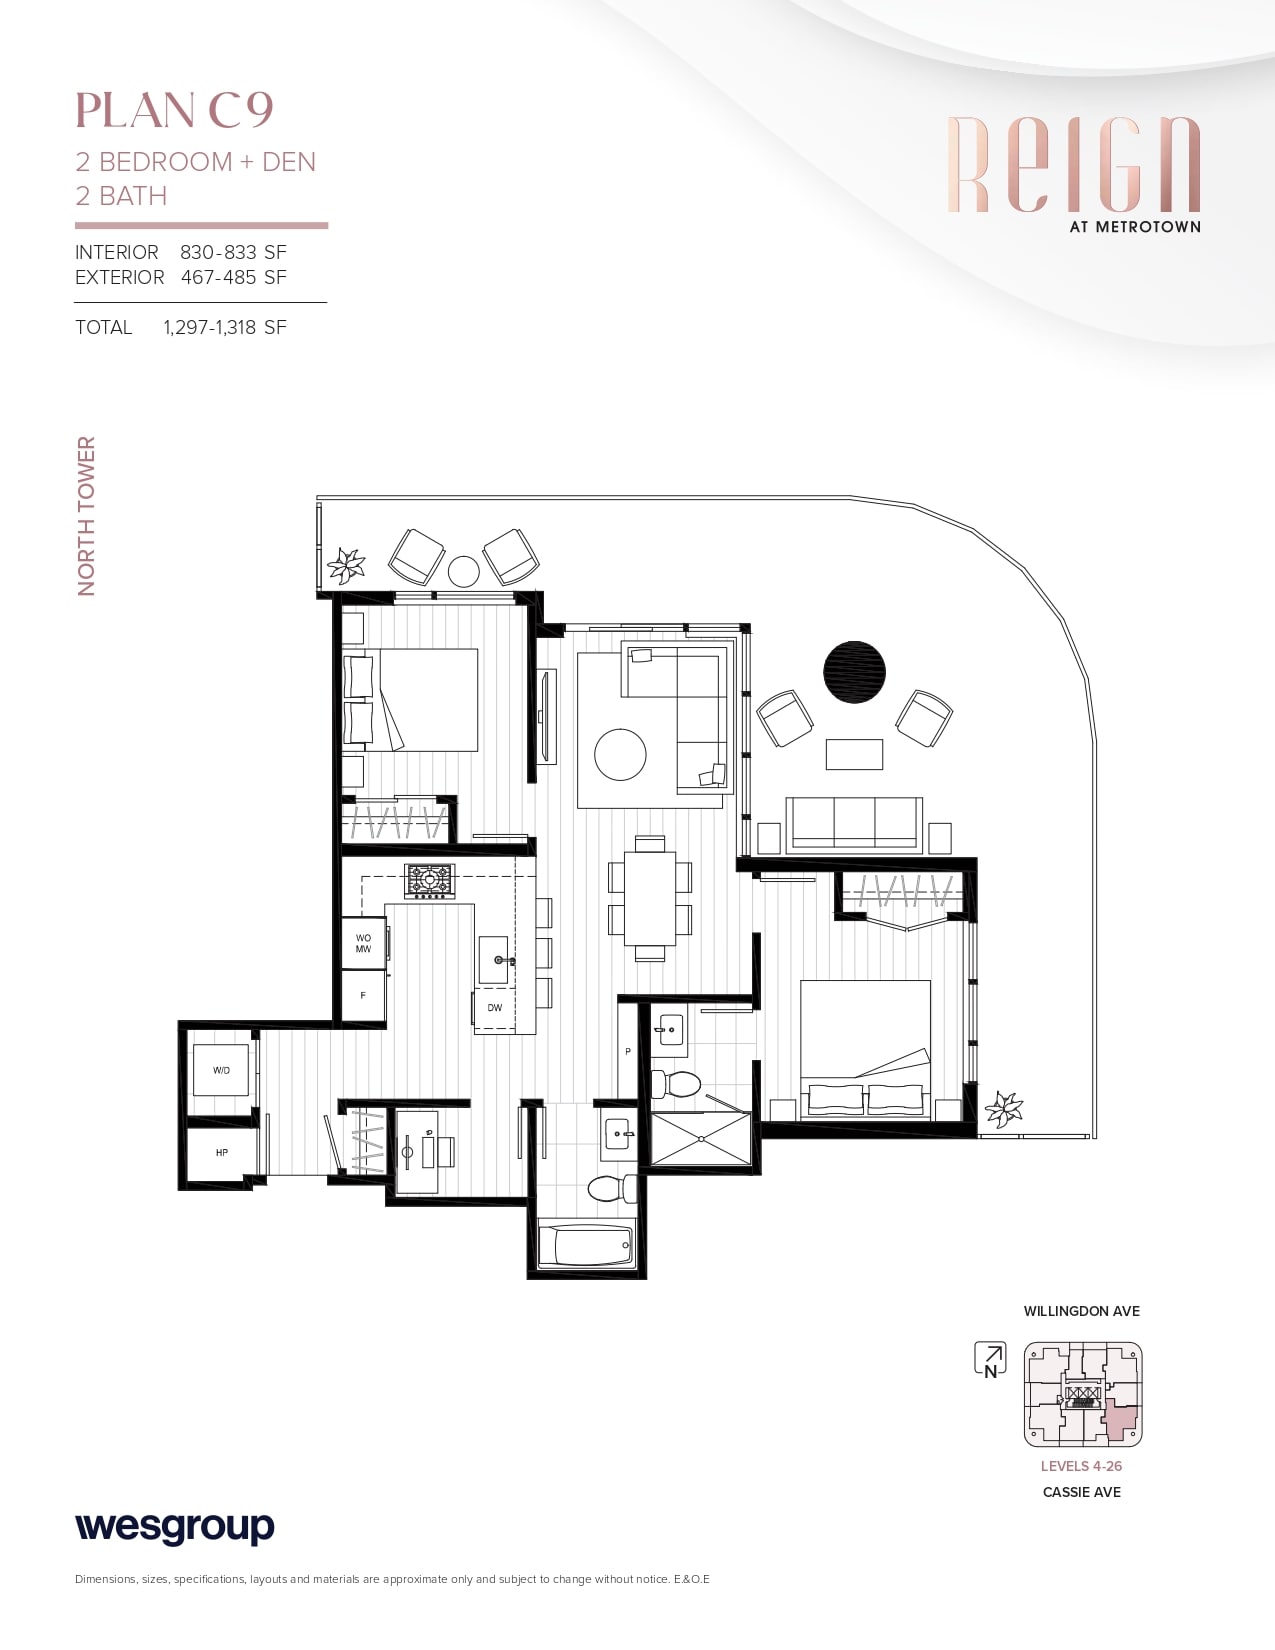 Reign_-_North_Tower_-_Typical_Floorplans_-_FINAL__page-0016-min.jpg